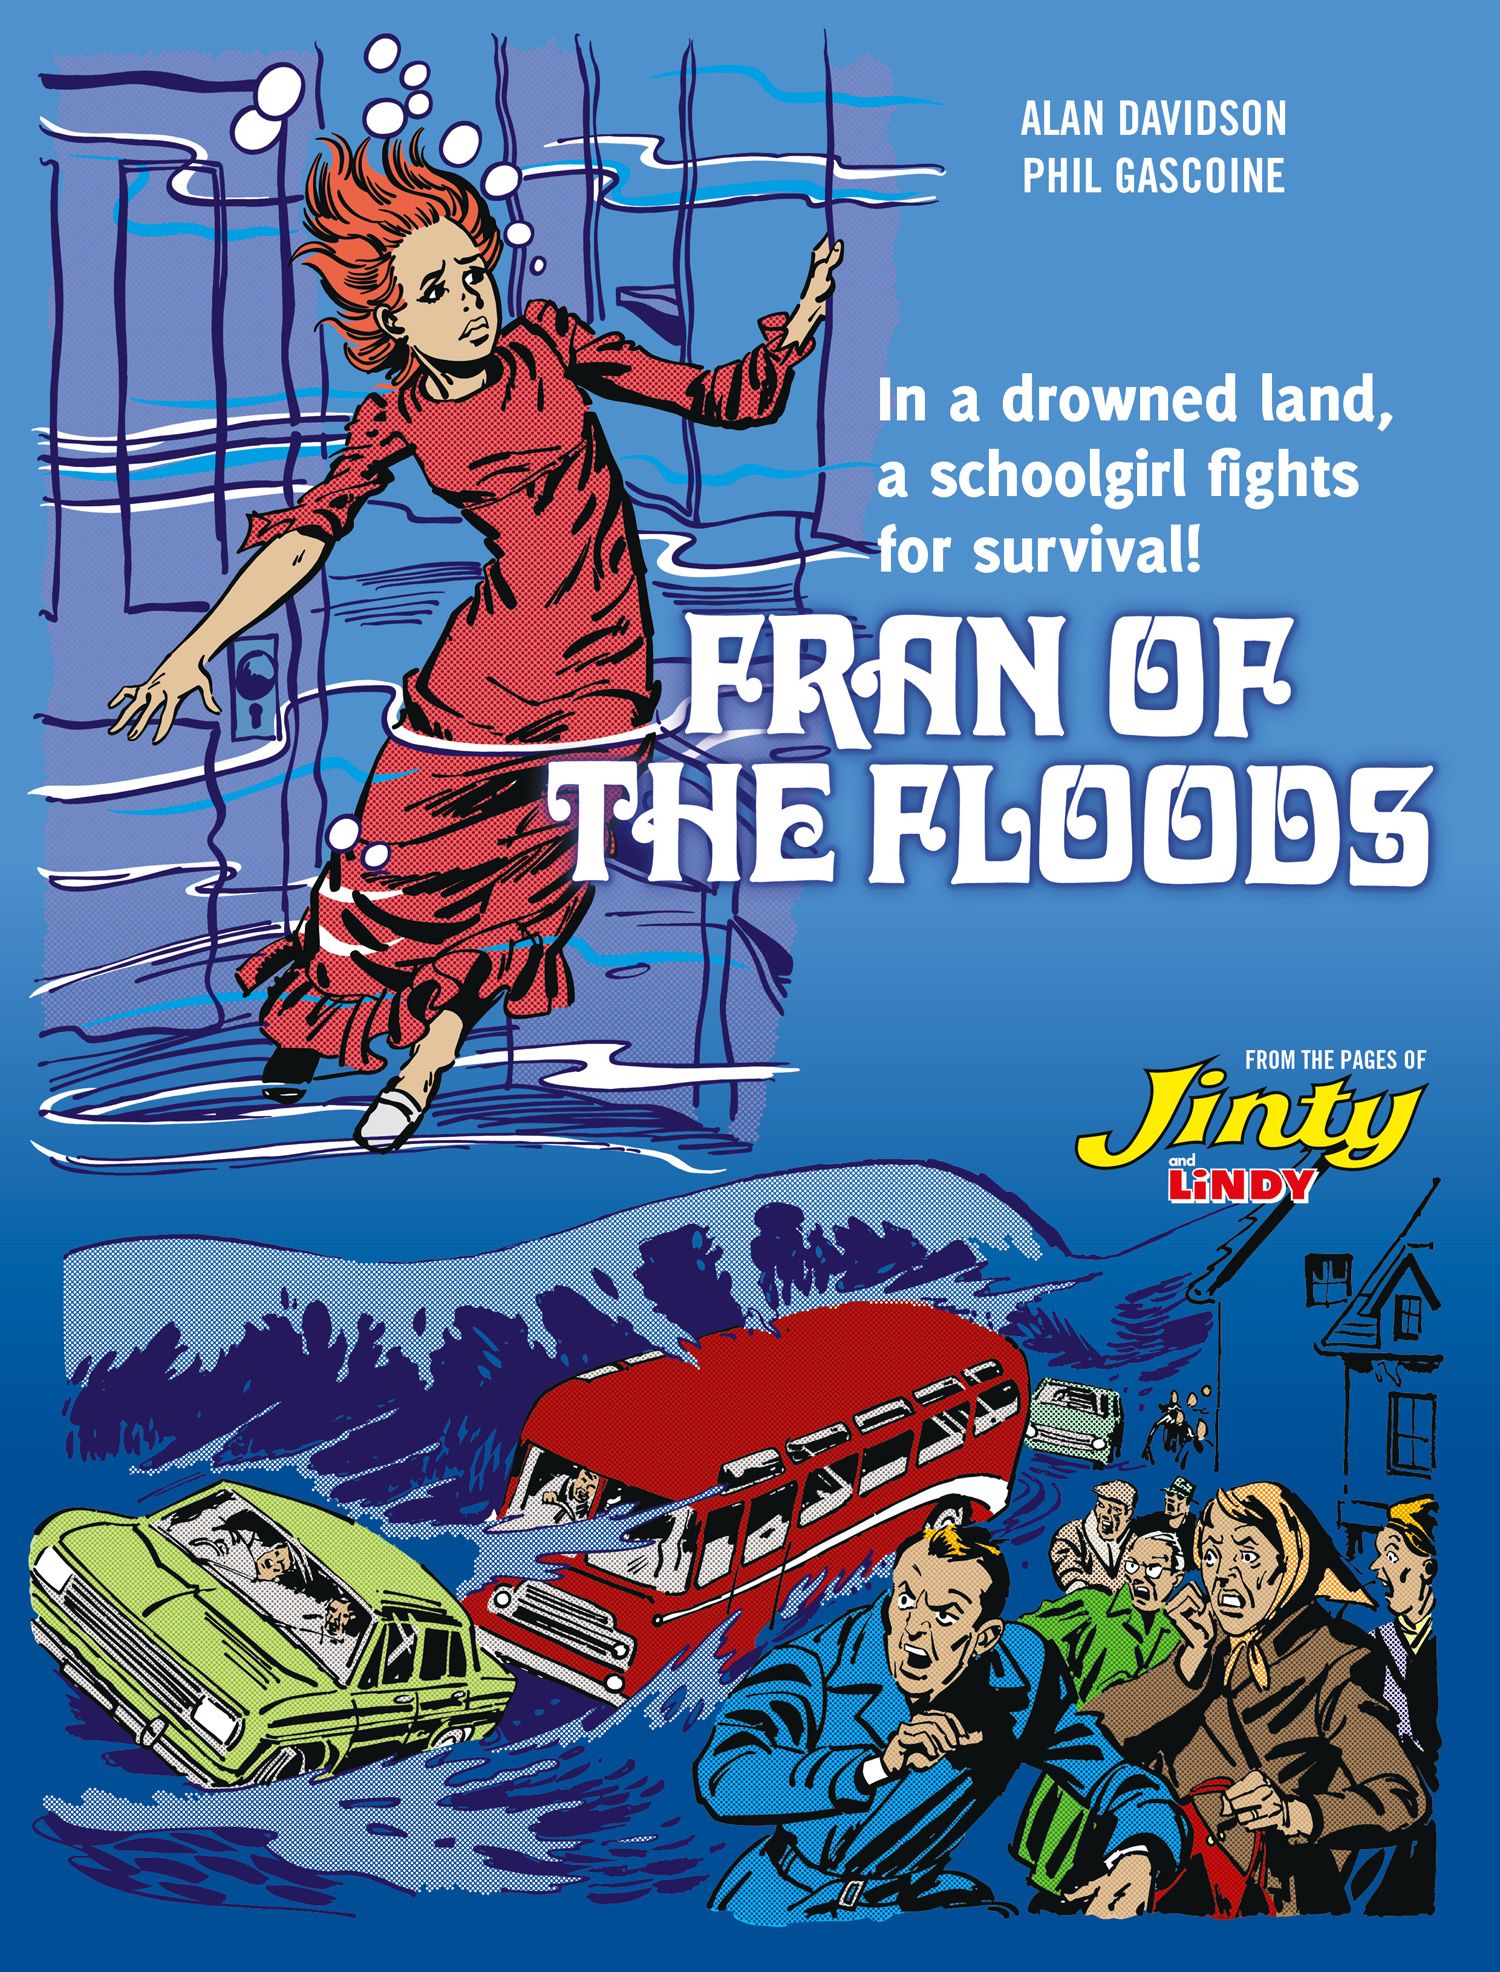 PRE-ORDER NOW: Fran of the Flood